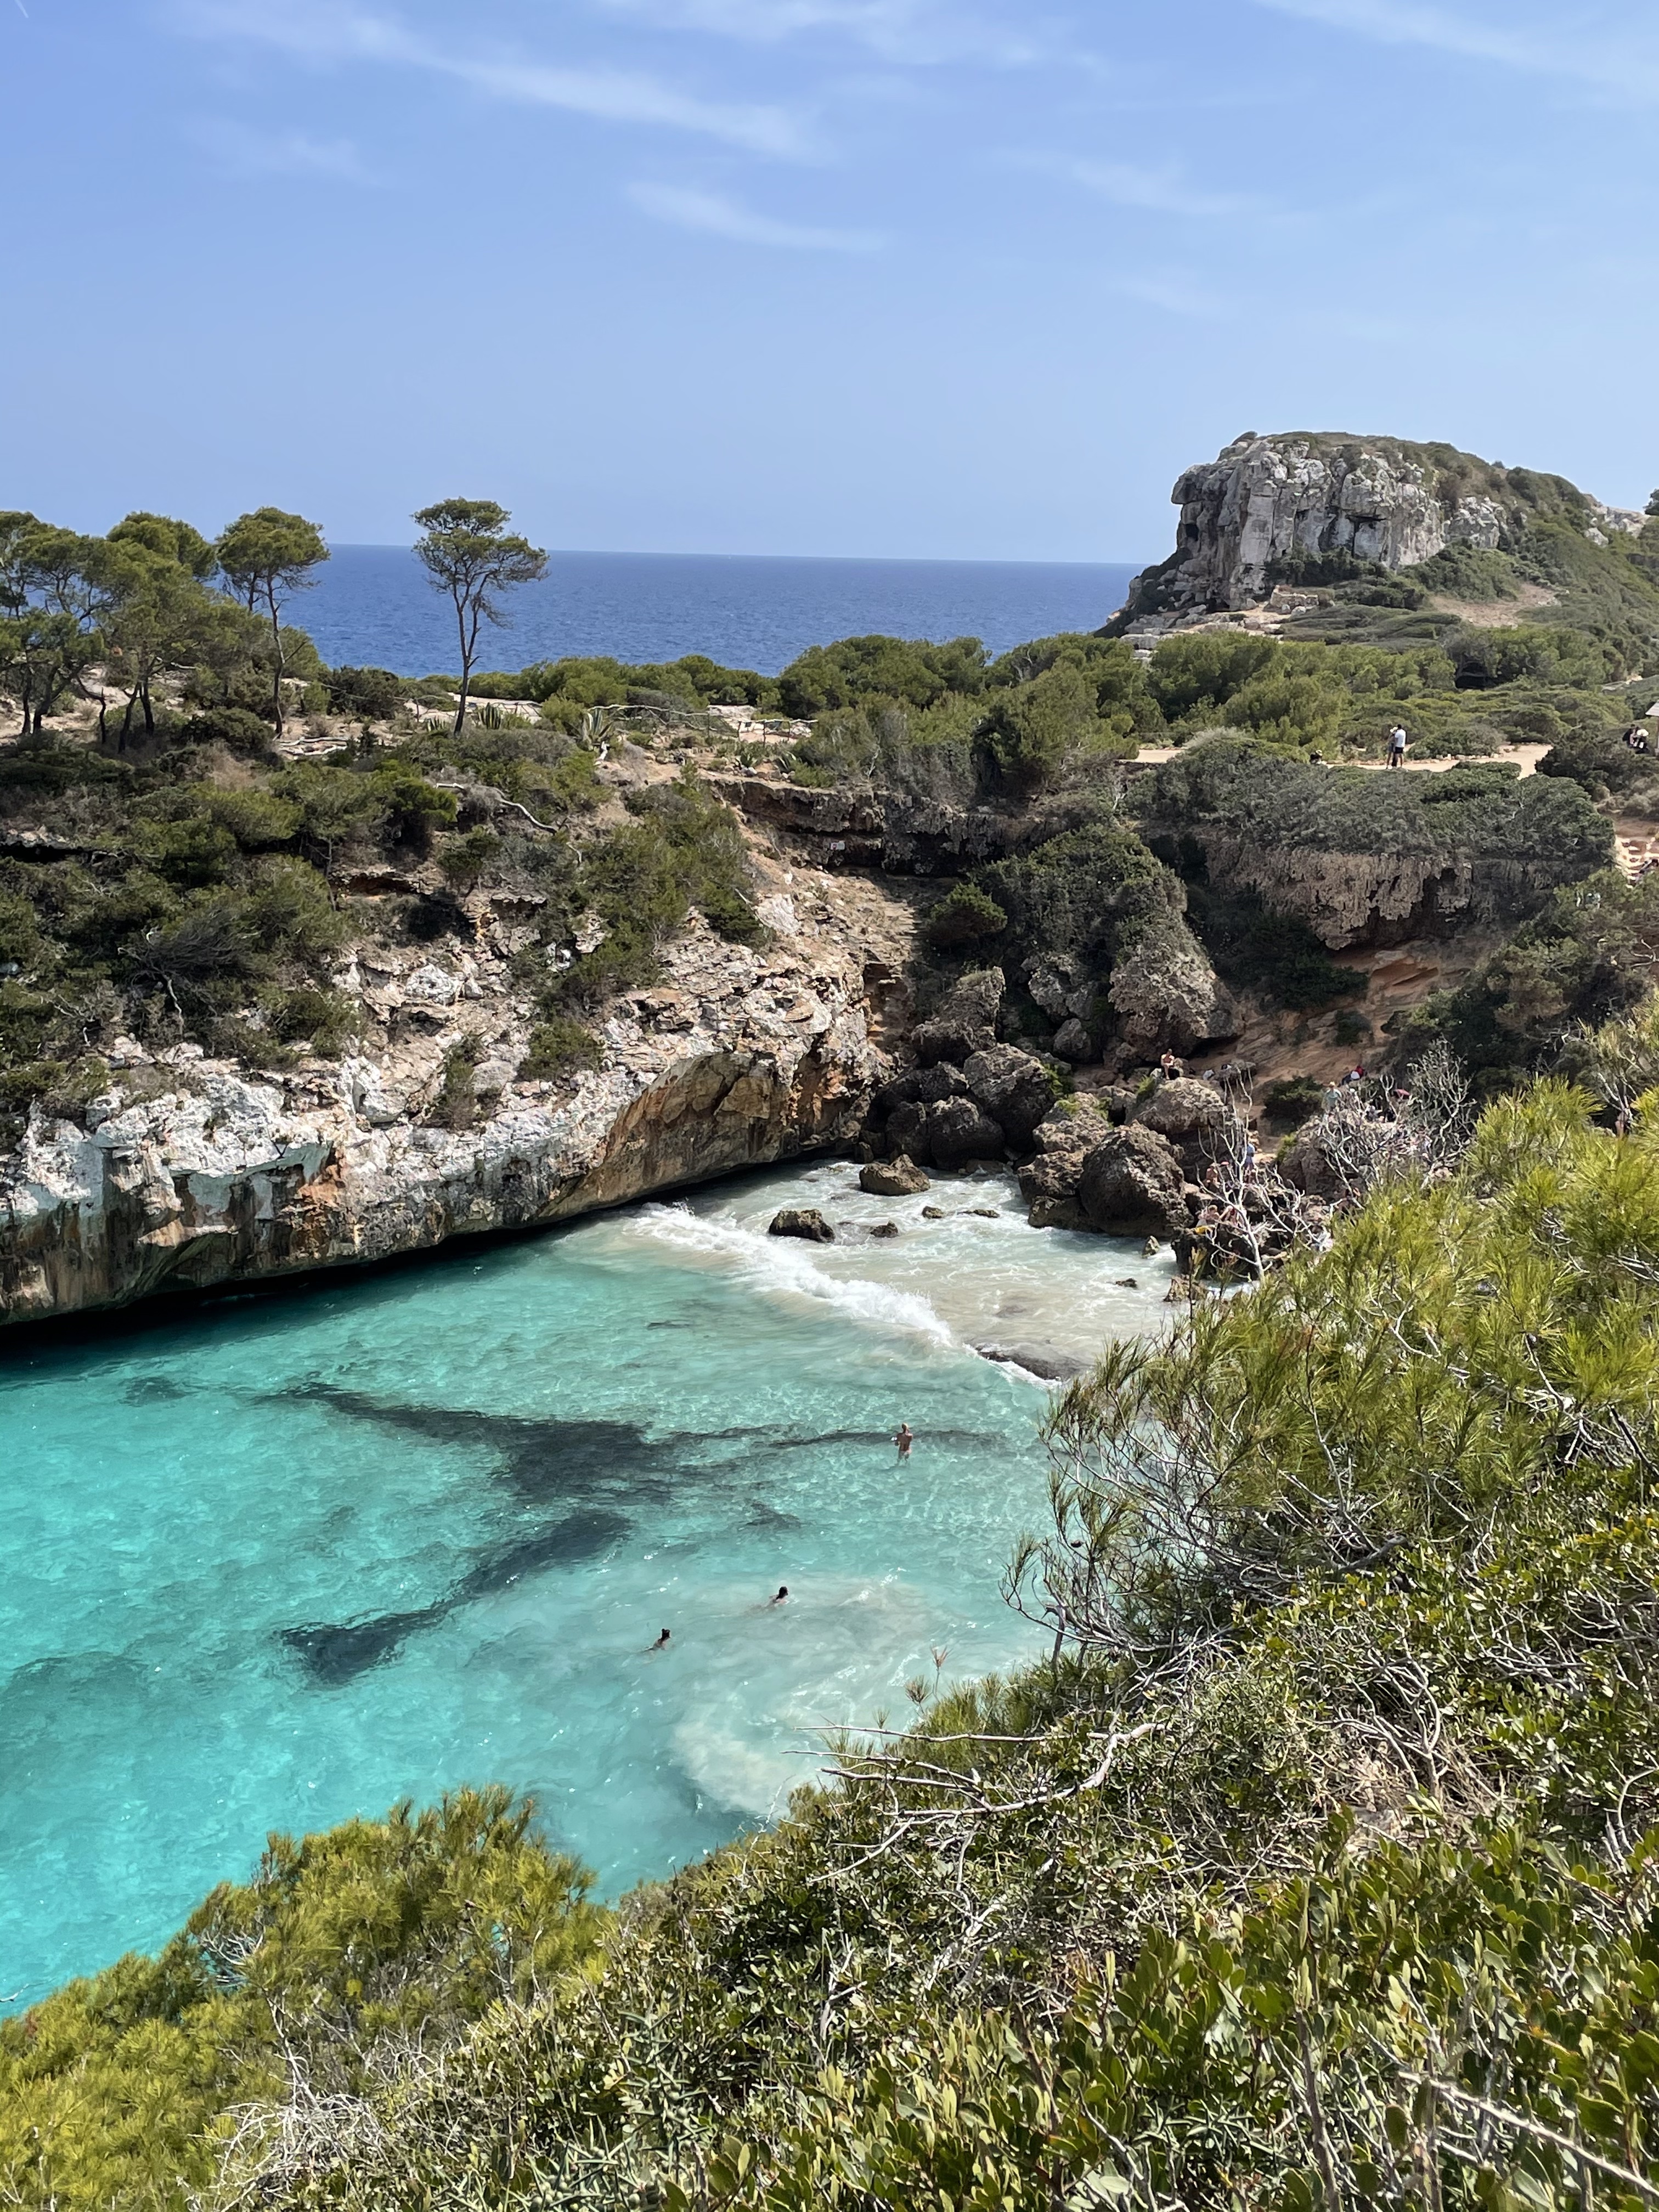 Cala Moro in the South East of Mallorca. If you do not know when to avoid Mallorca you will end up on overcrowded beaches. Sometimes just coming two weeks earlier or later can make a big difference!